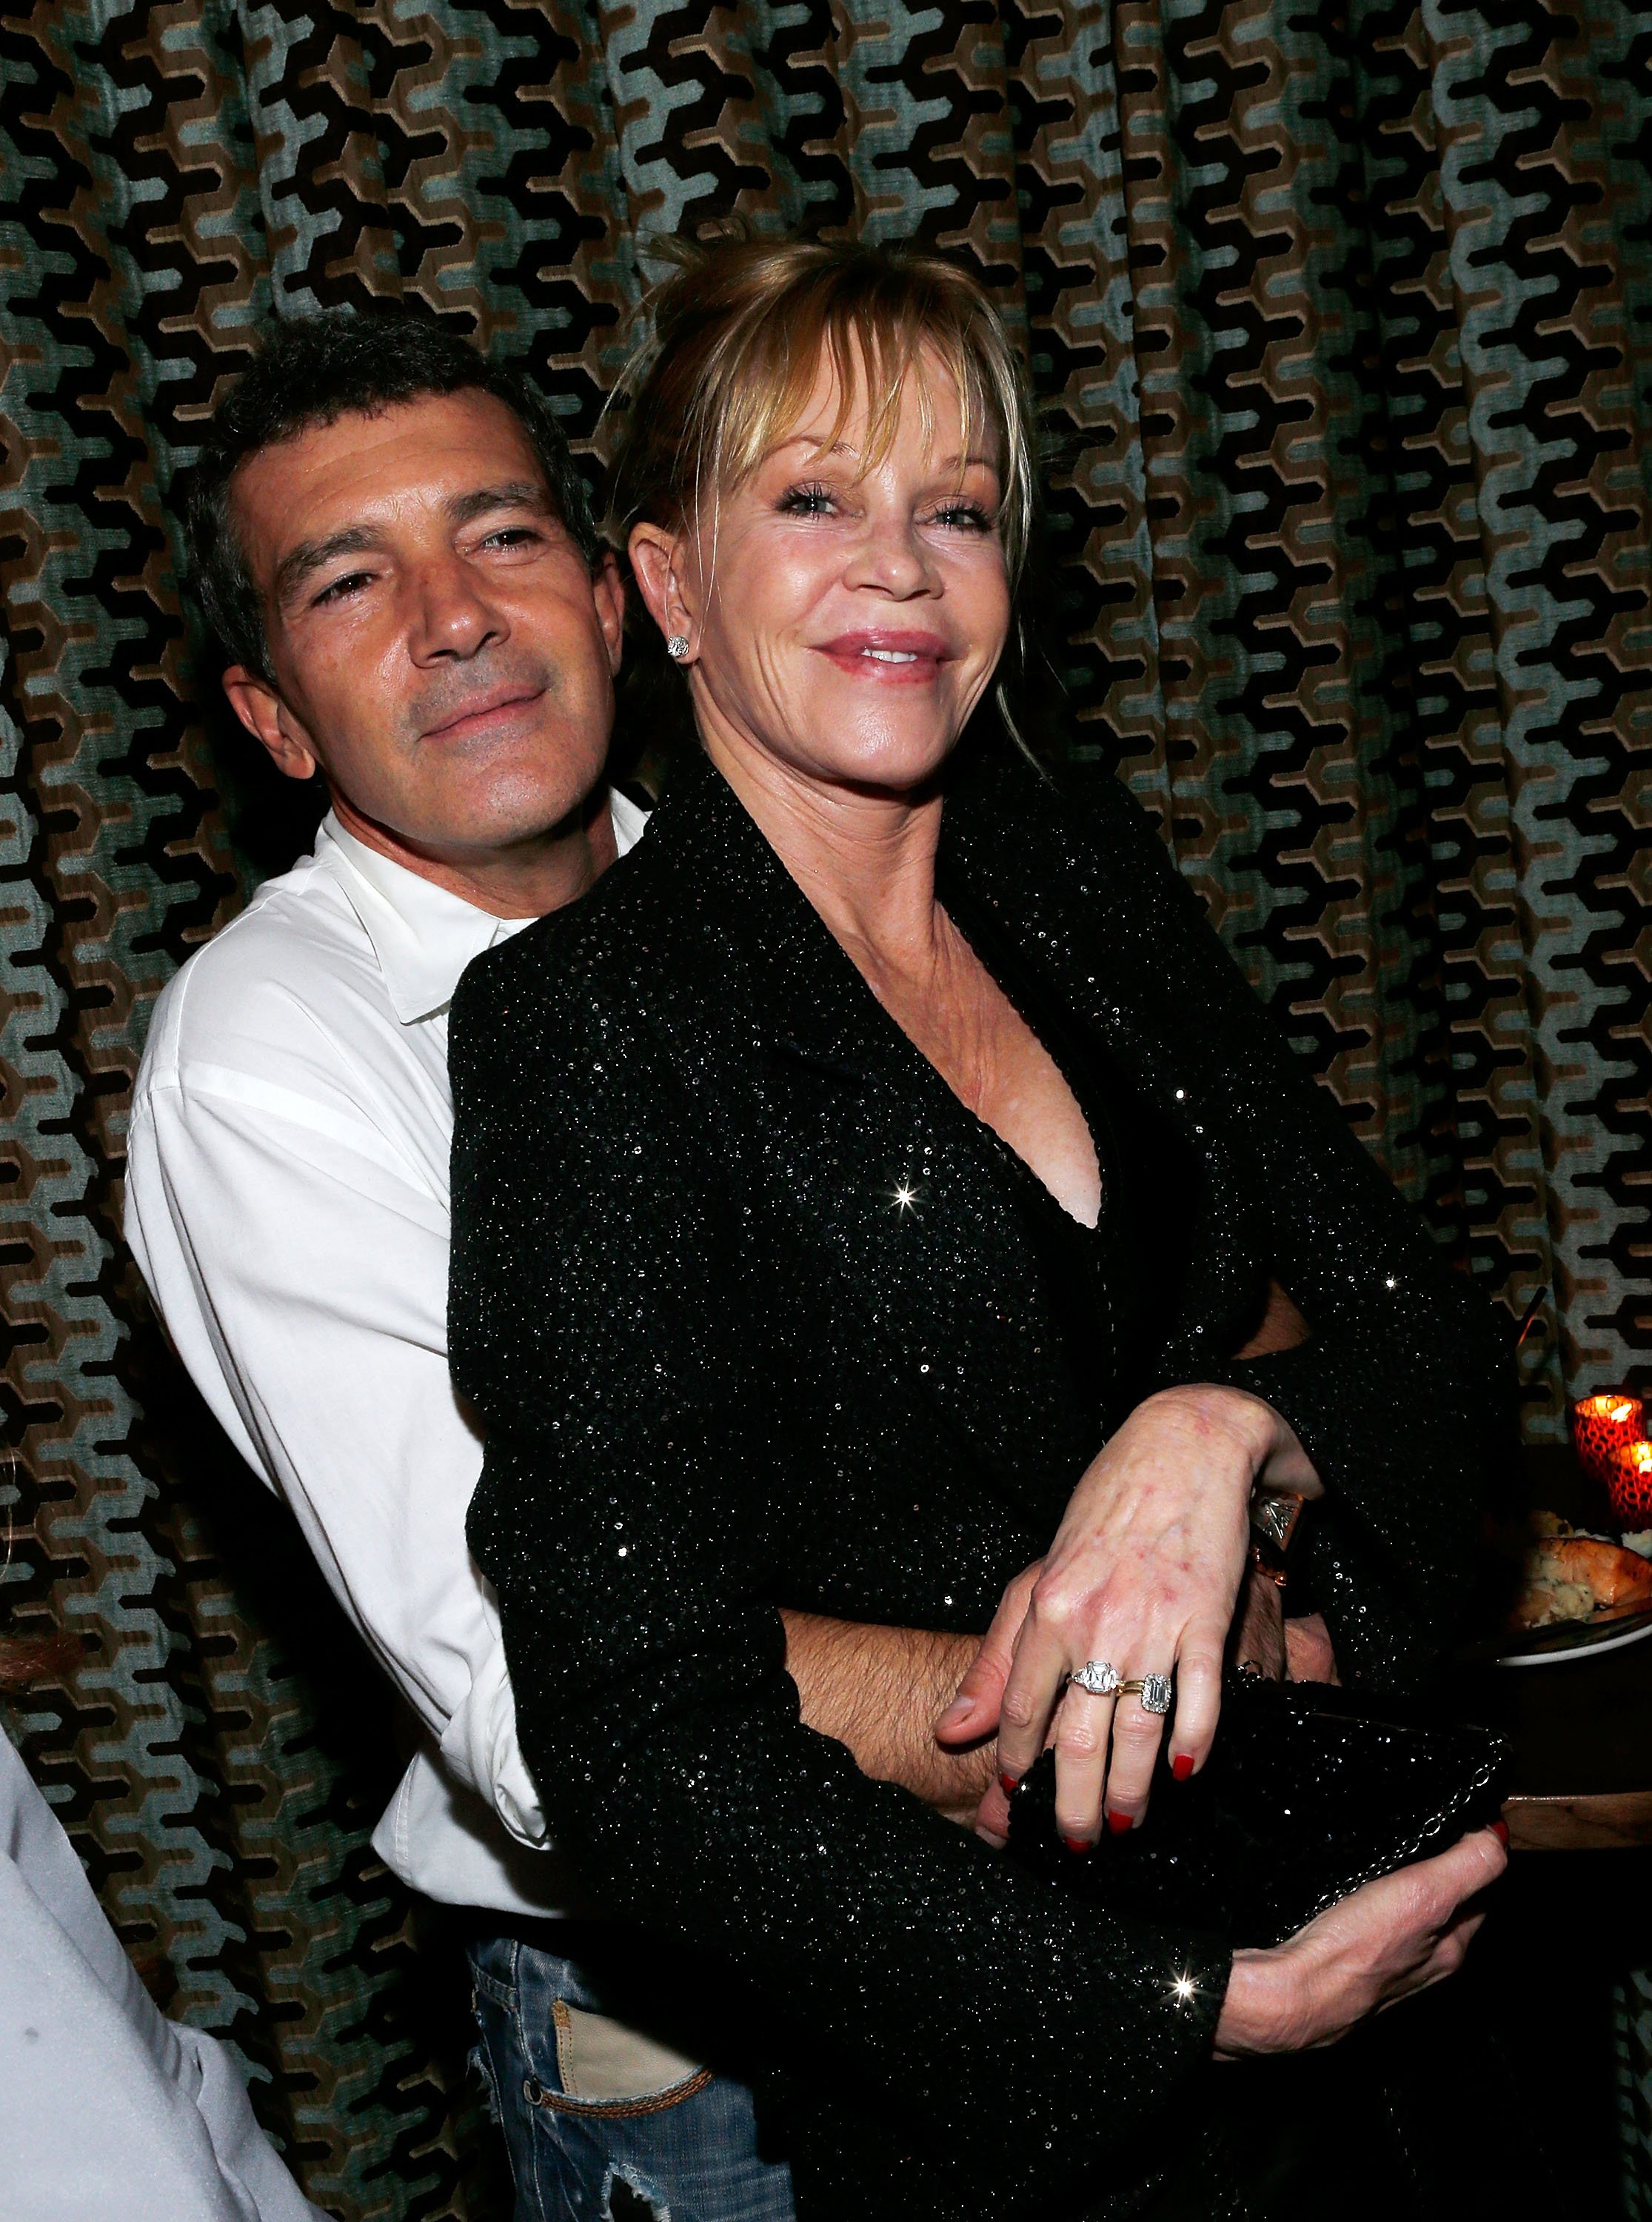 Antonio Banderas and actress Melanie Griffith attend the after party for the "Black Nativity" premiere at The Red Rooster on November 18, 2013 | Source: Getty Images